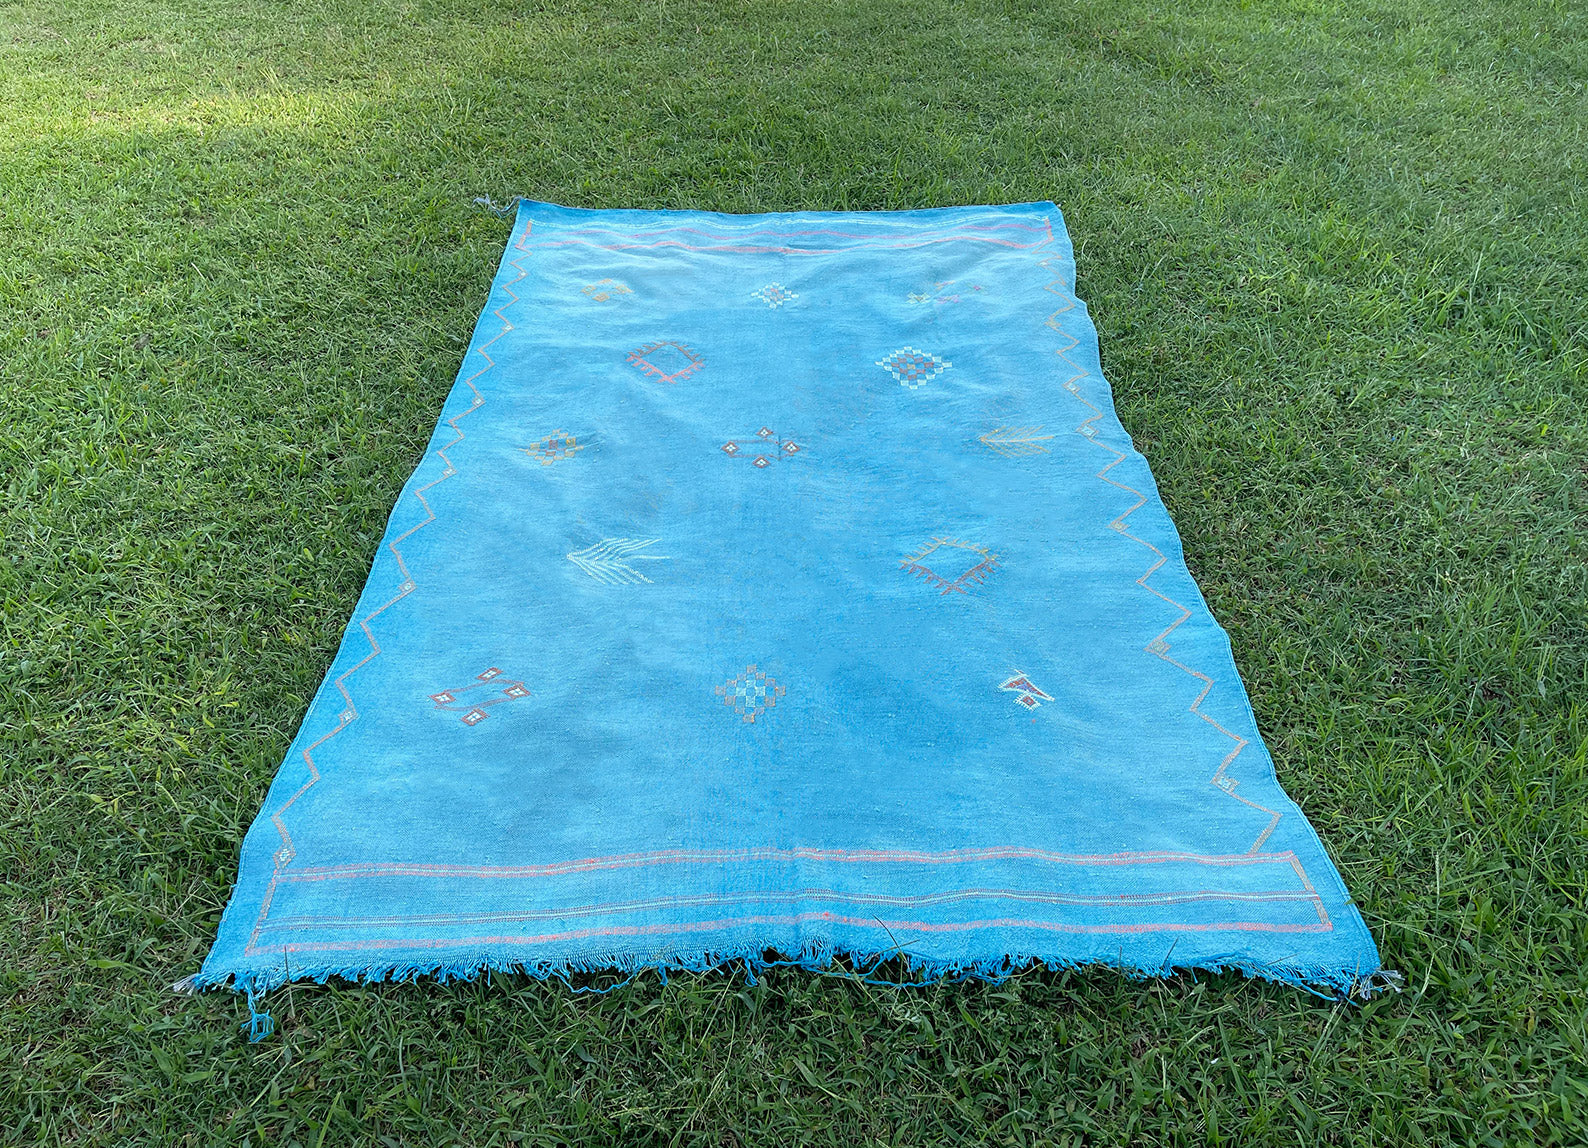 Sky blue Moroccan sabra rug with Berber motif against grass background - Moroccan Interior